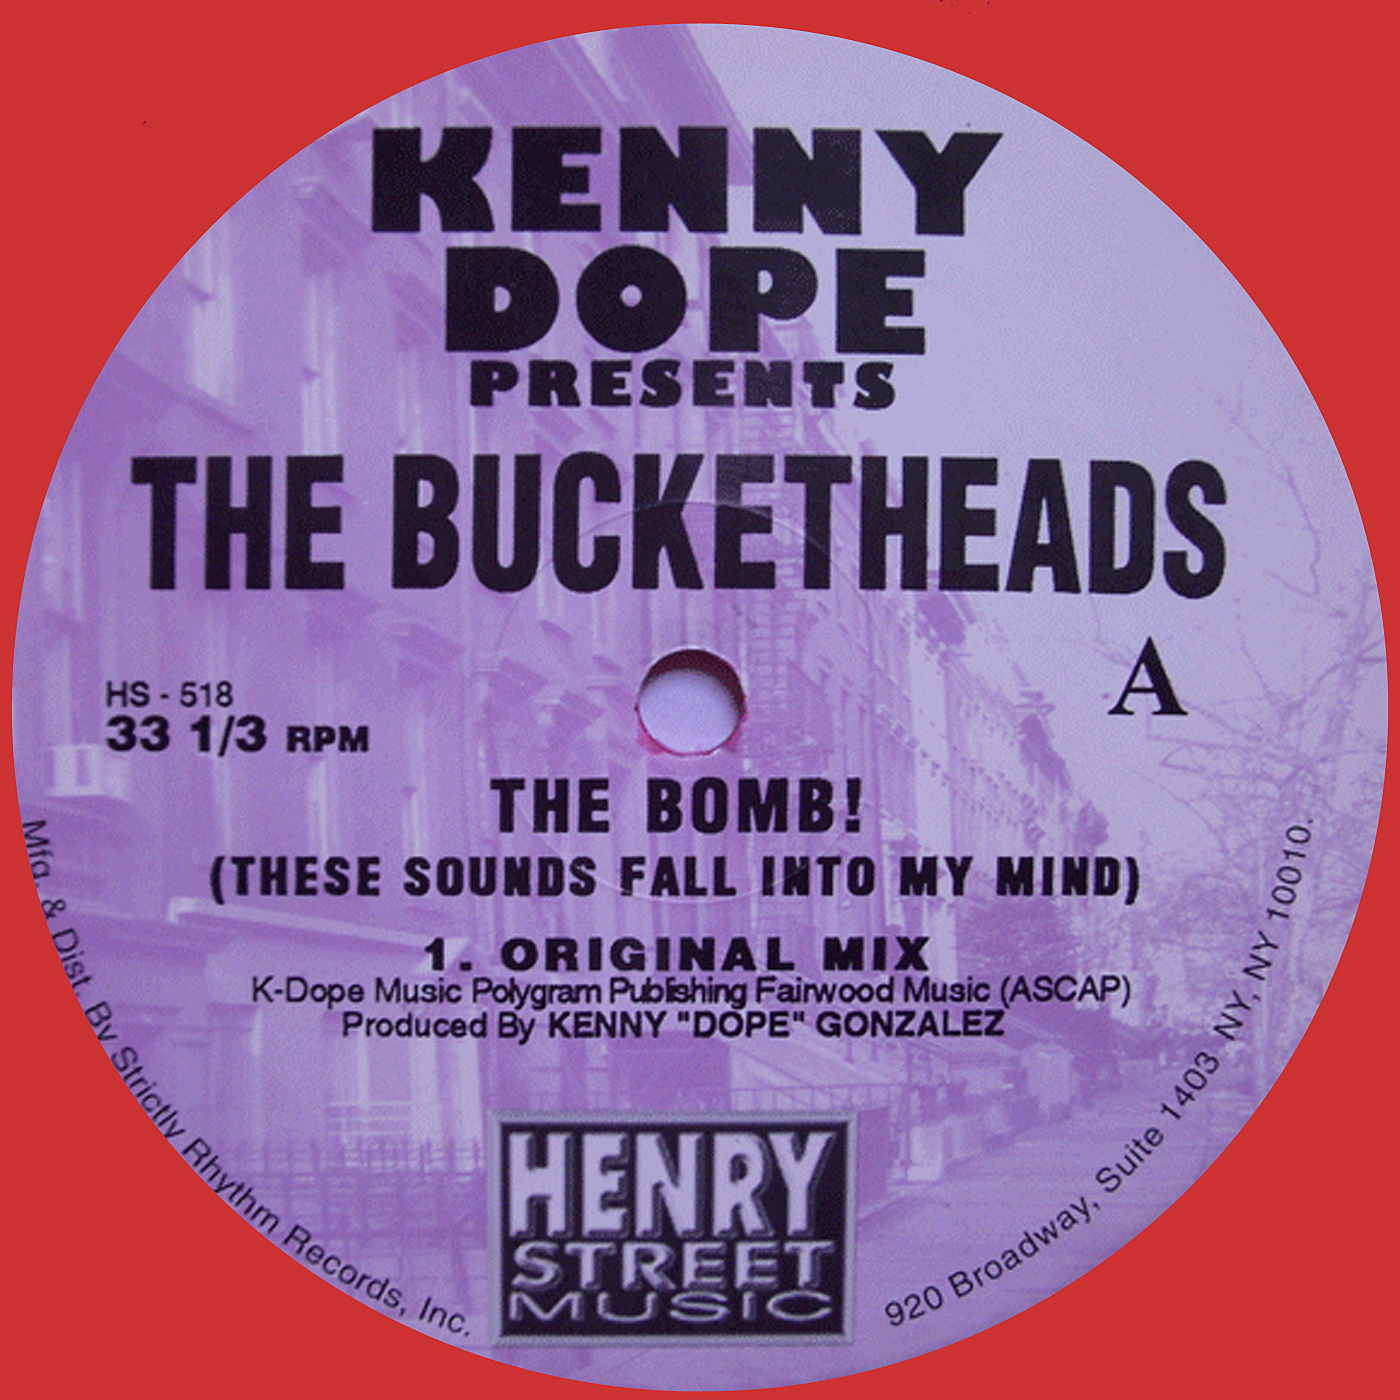 00 Kenny 'Dope' presents The Bucketheads - The Bomb! (These Sounds Fall Into My Mind) Cover